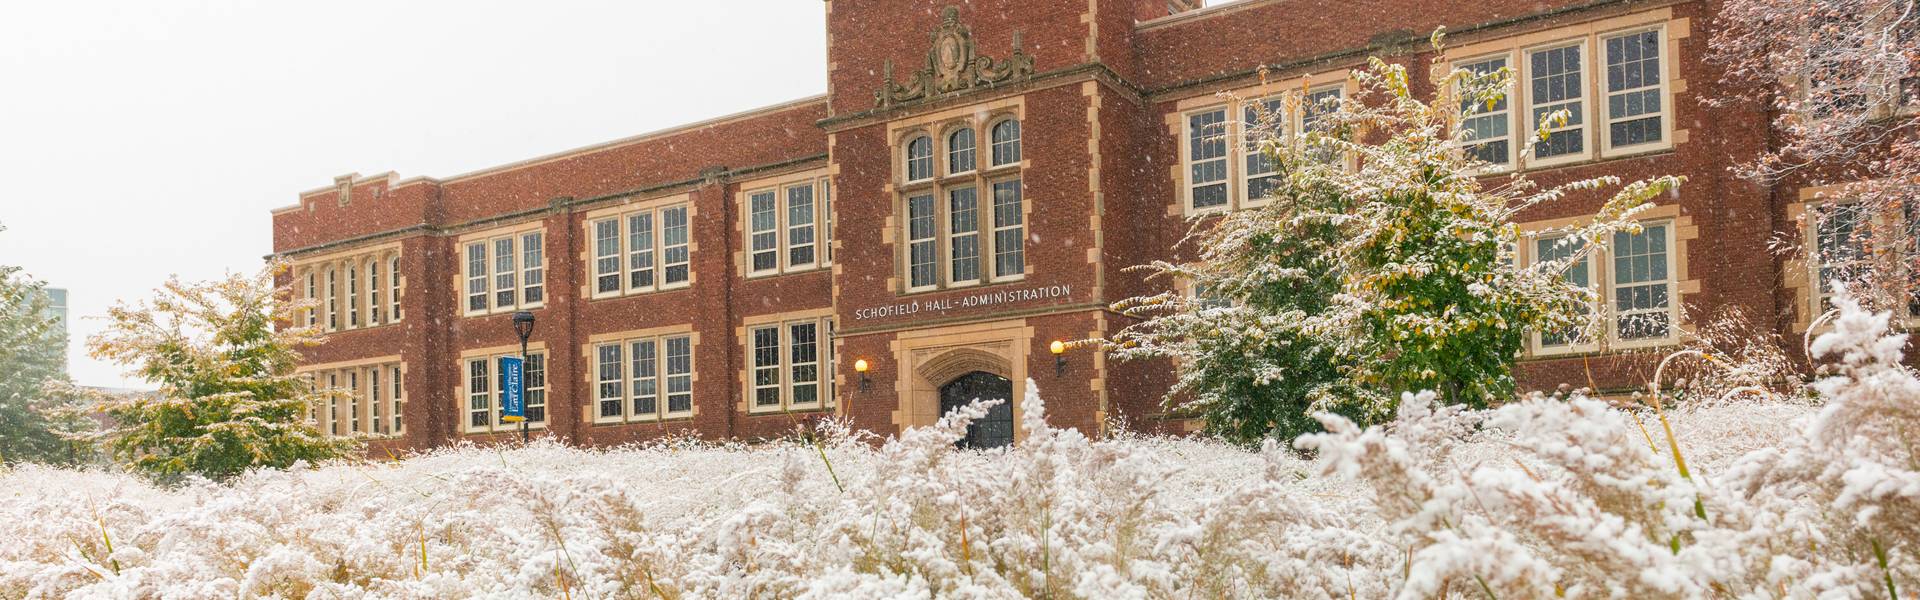 Schofield Hall in the background of snowy wild grasses.